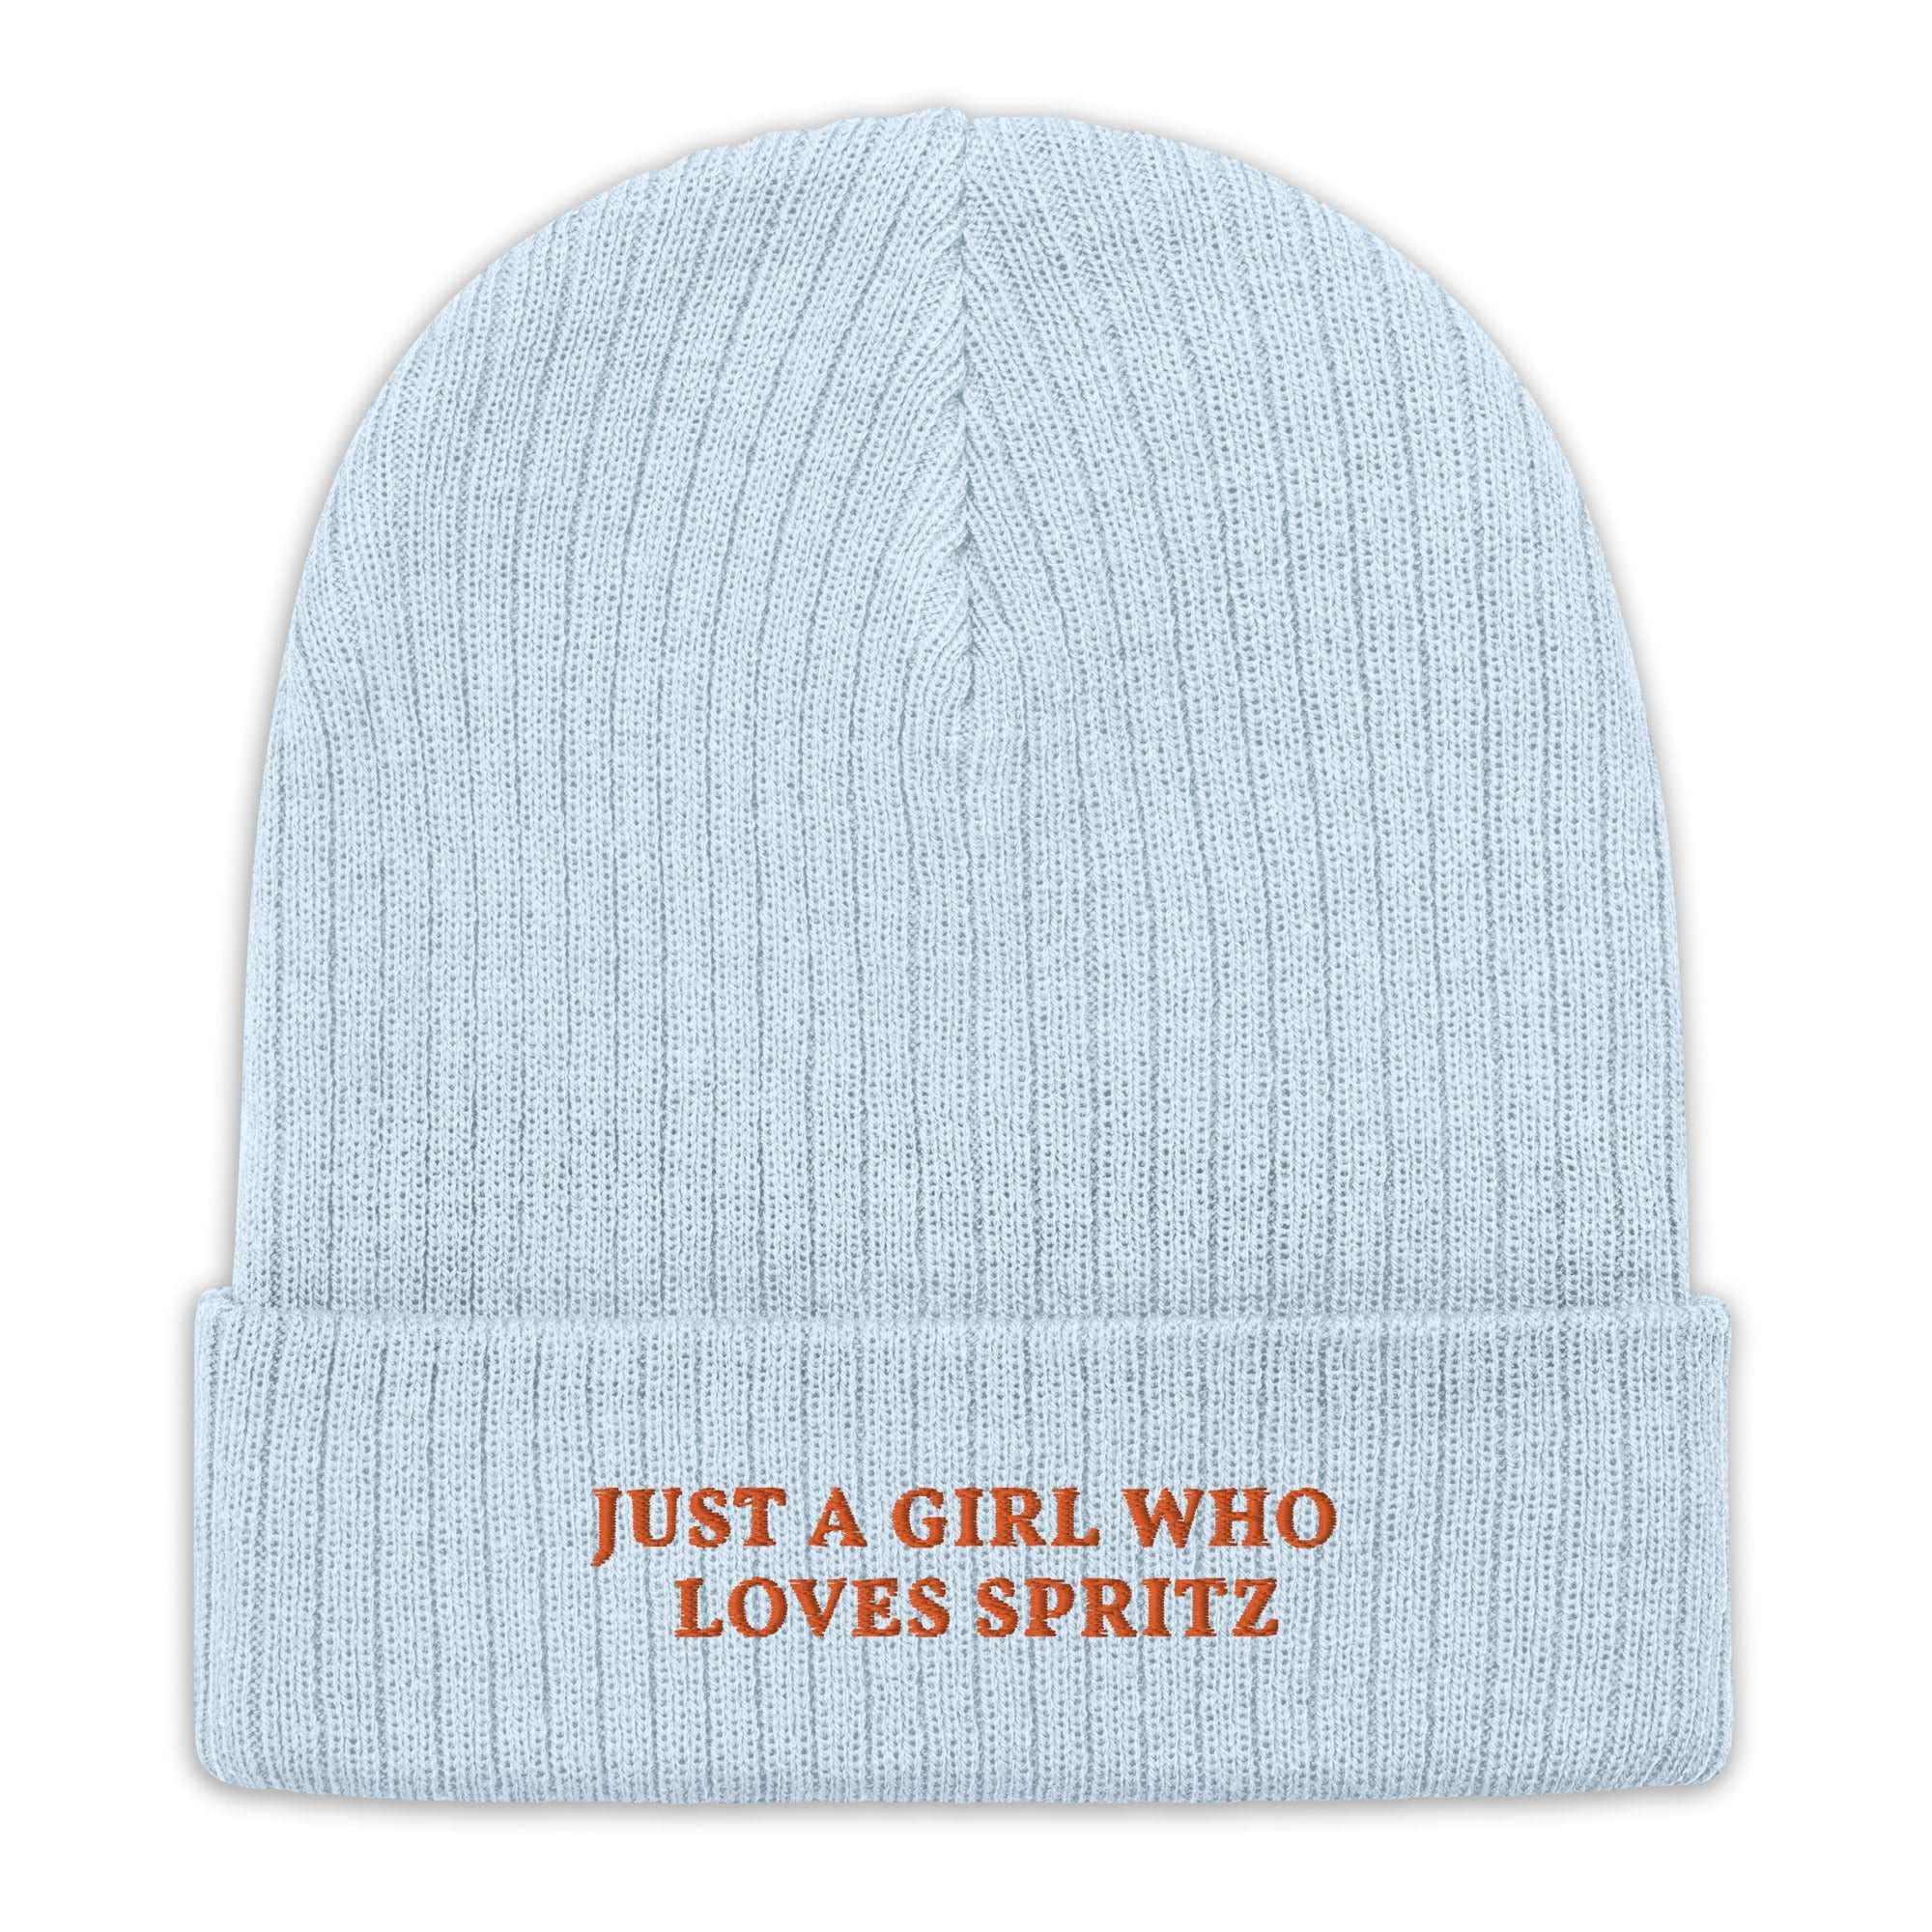 Just a Girl who loves Spritz - Beanie - The Refined Spirit